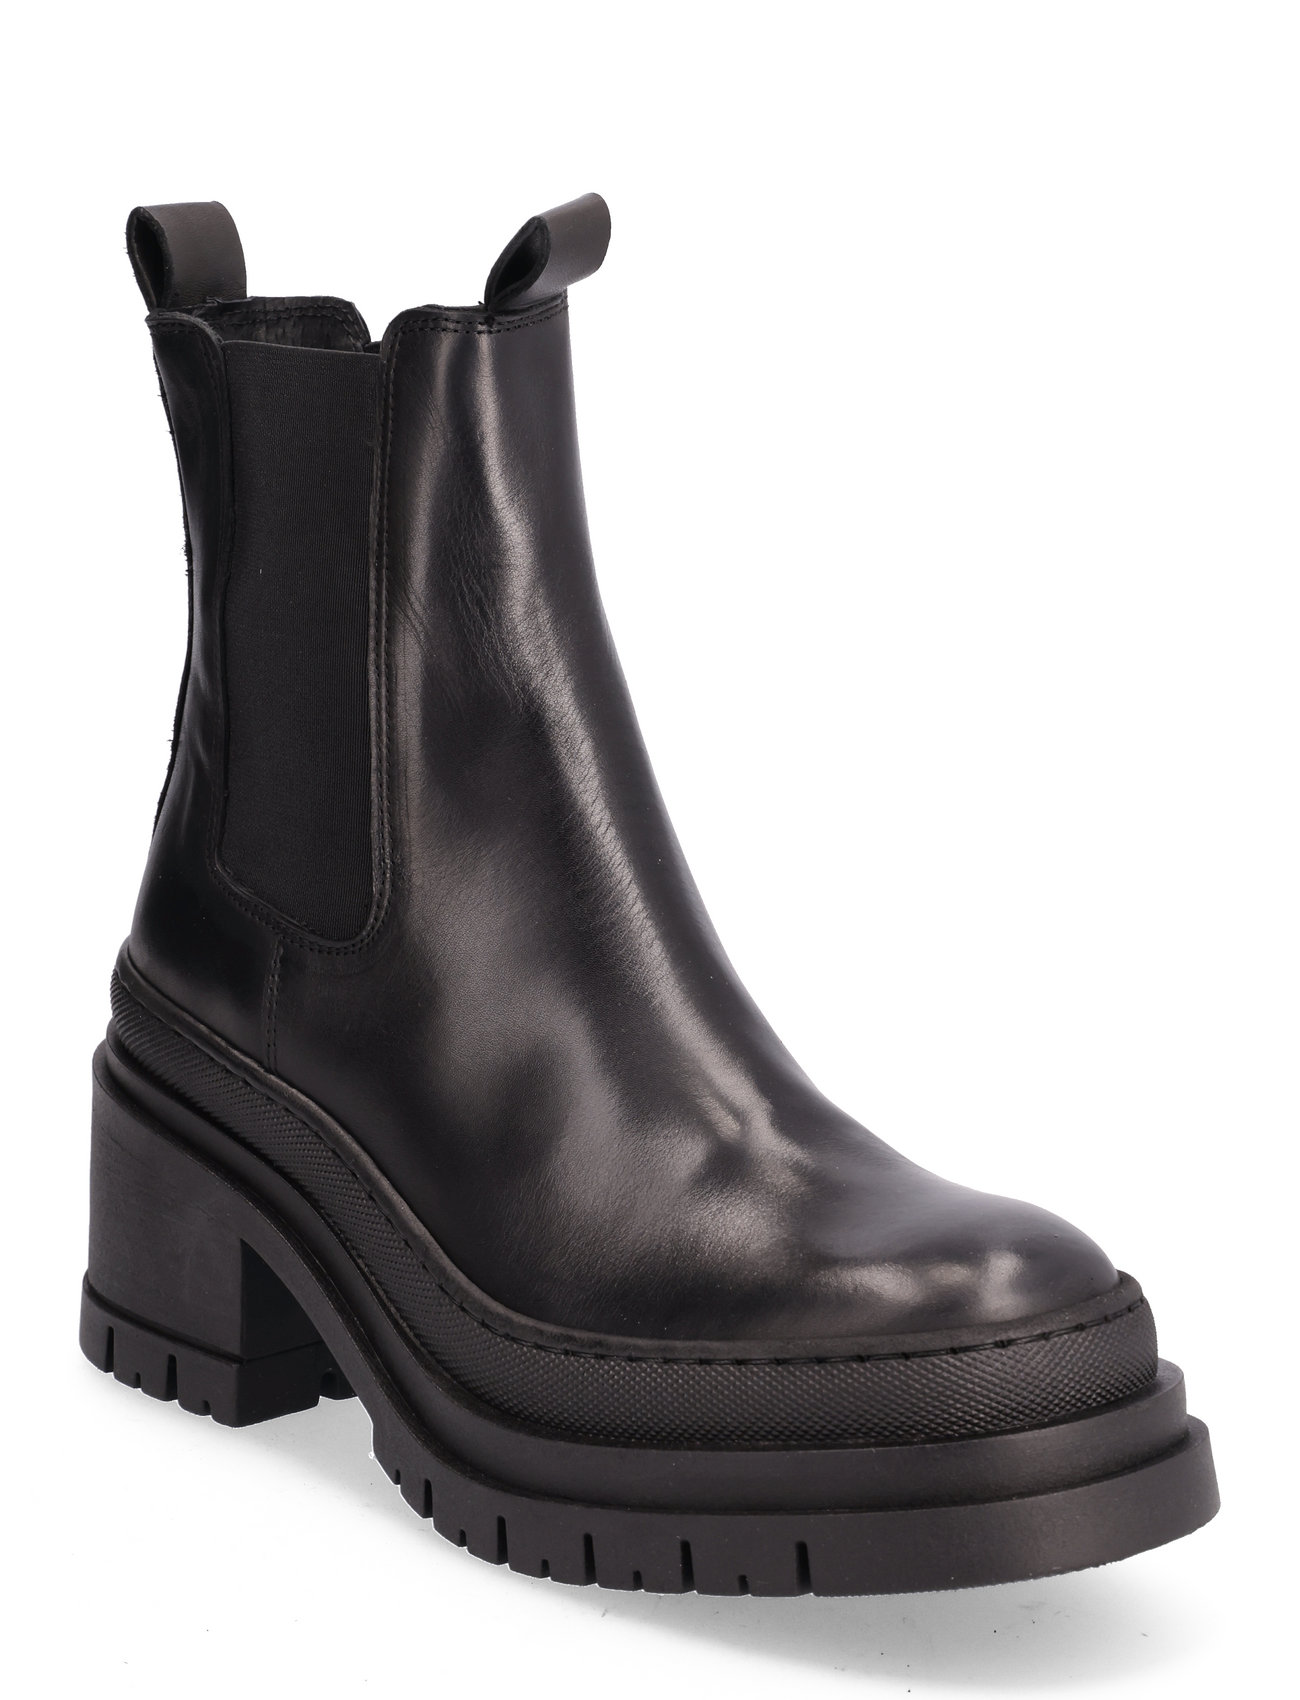 Macy Shoes Boots Ankle Boots Ankle Boots With Heel Black Pavement